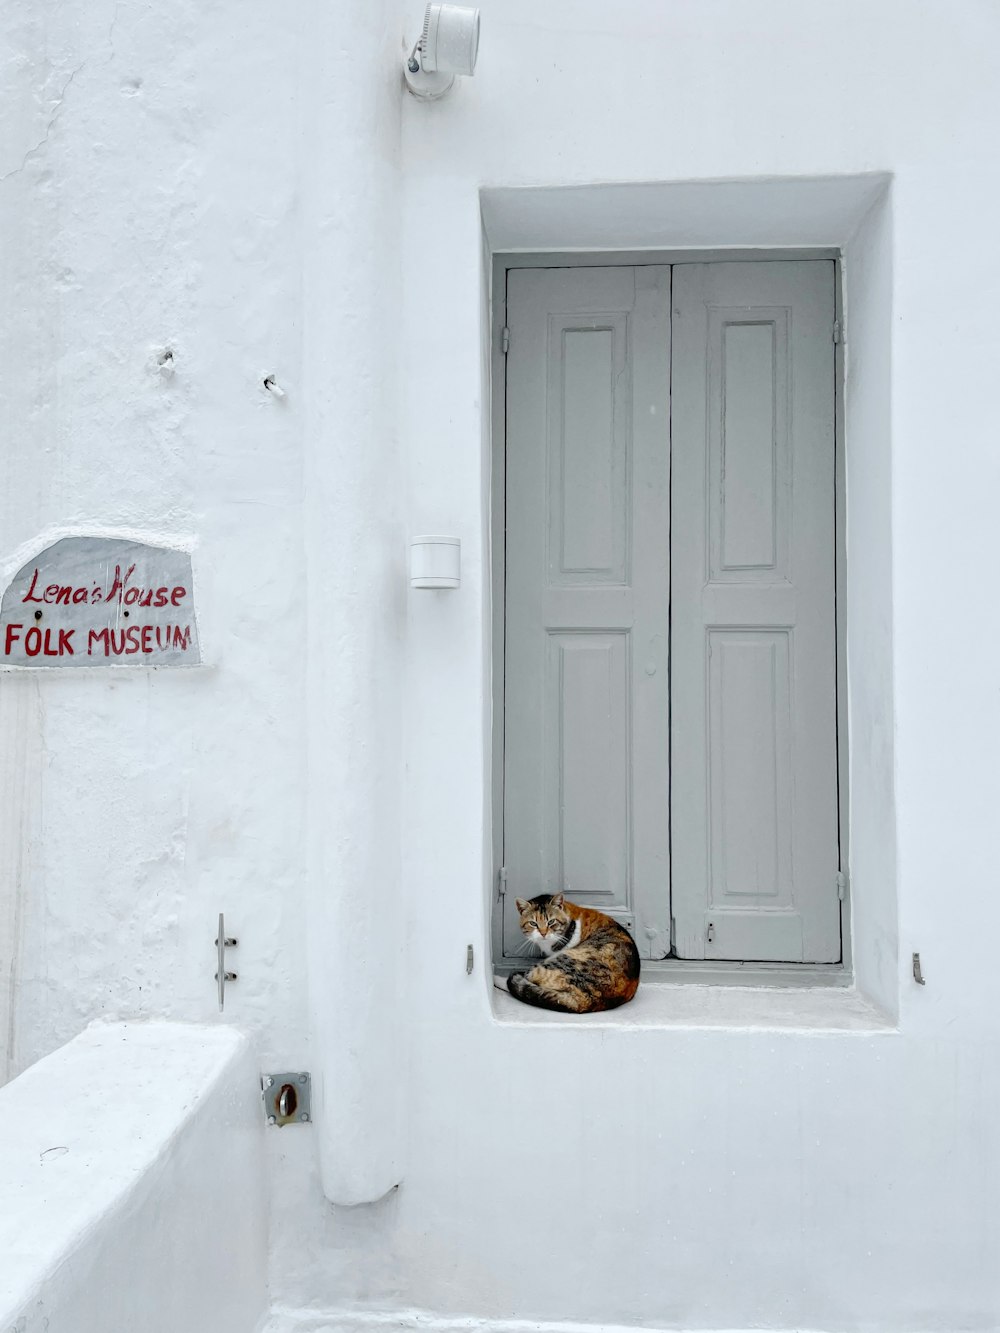 a cat sleeping in a window of a white building